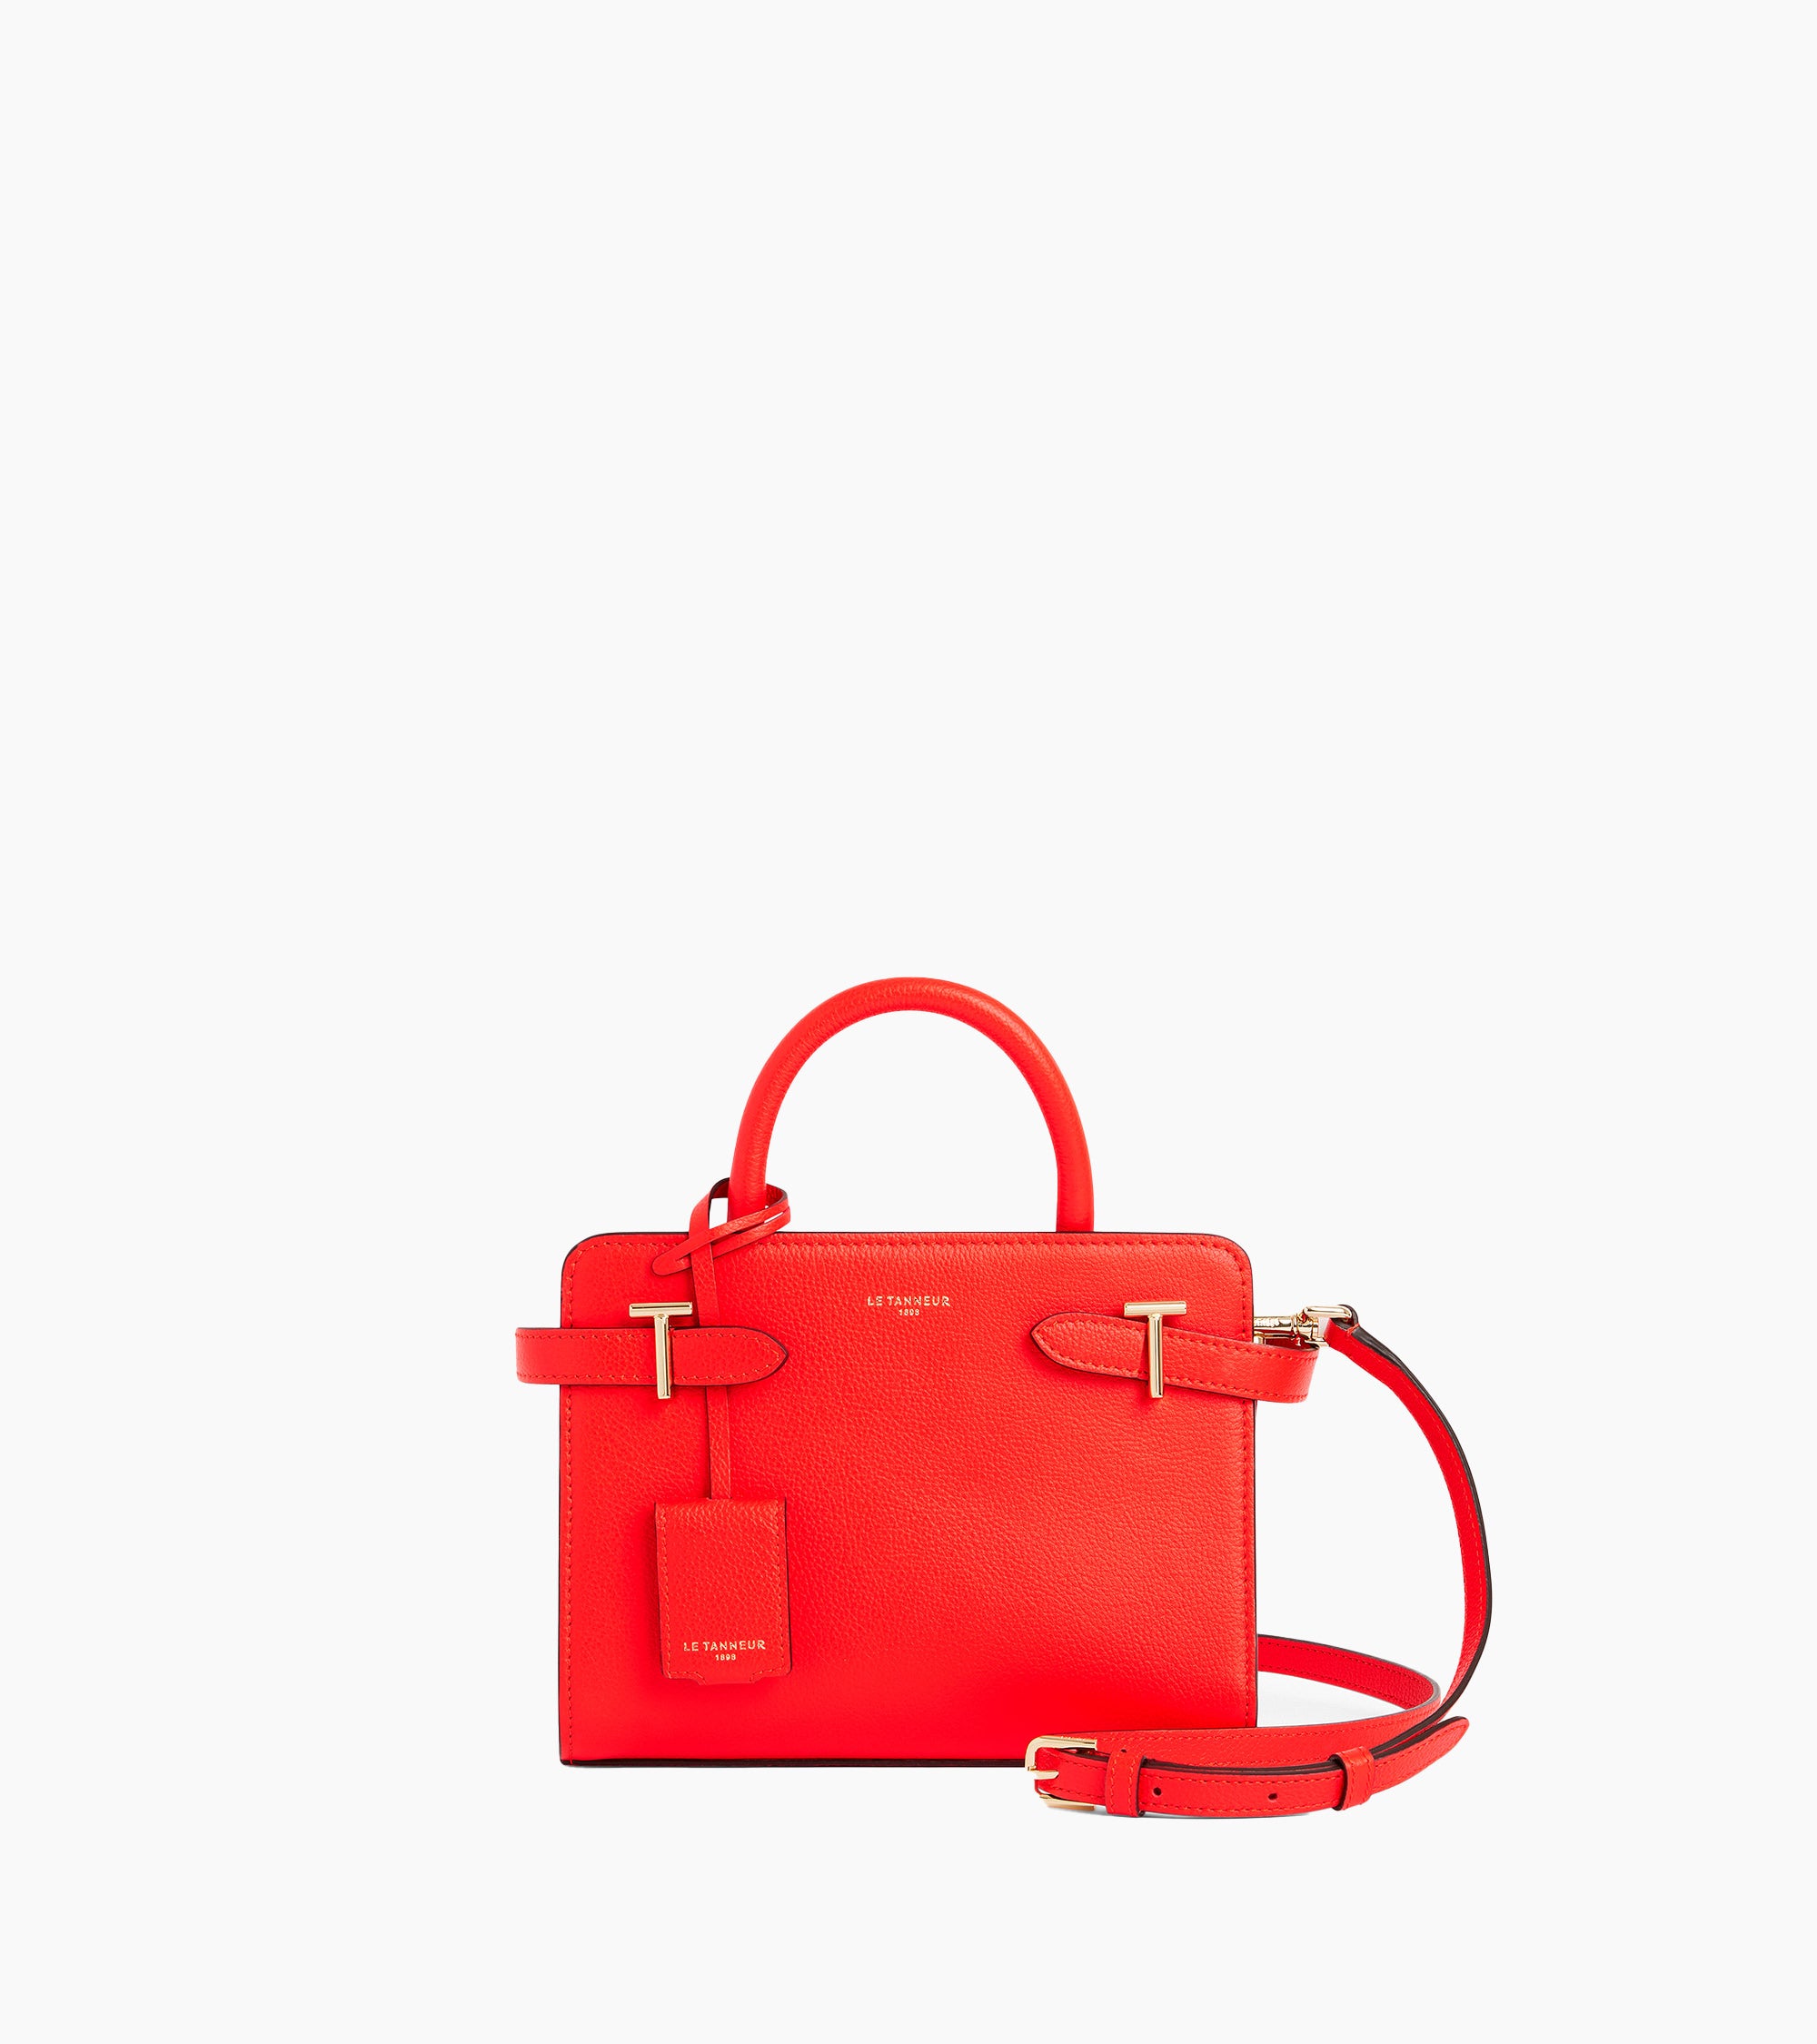 Emilie small handbag in grained leather